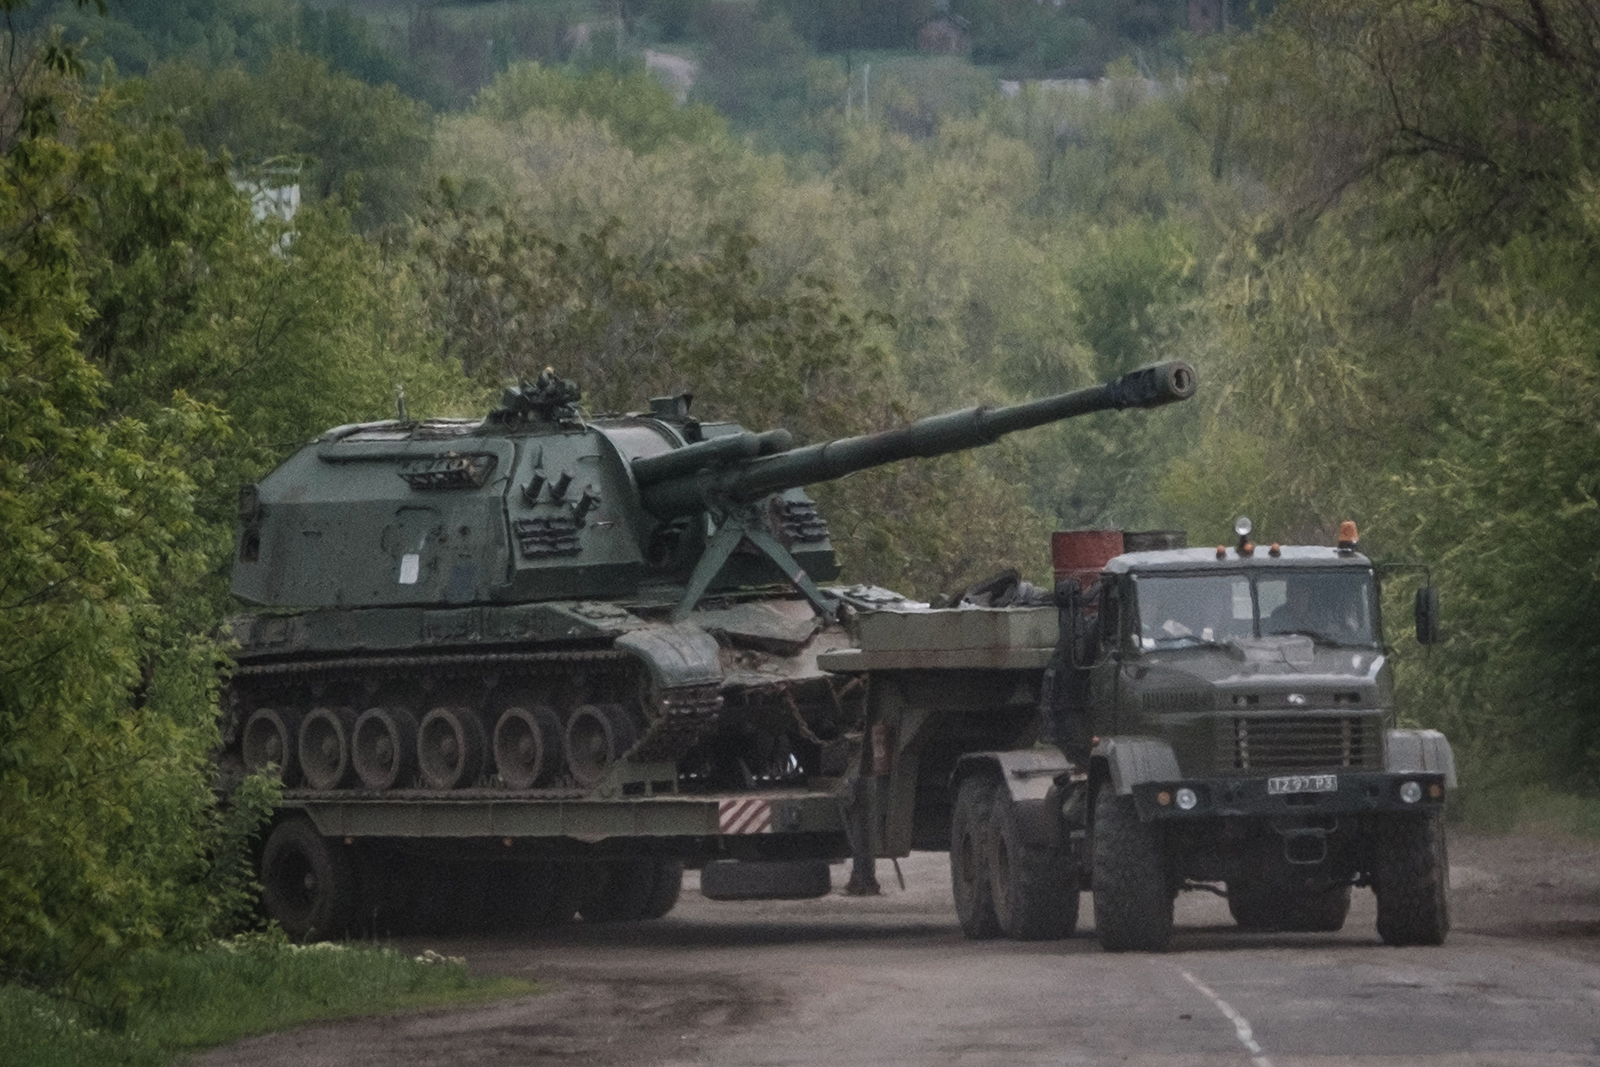 This photograph taken on May 10, 2022, shows an Ukrainian Army's self-propelled howitzer loading on a tank transporter near Bakhmut, eastern Ukraine, amid the Russian invasion of Ukraine.